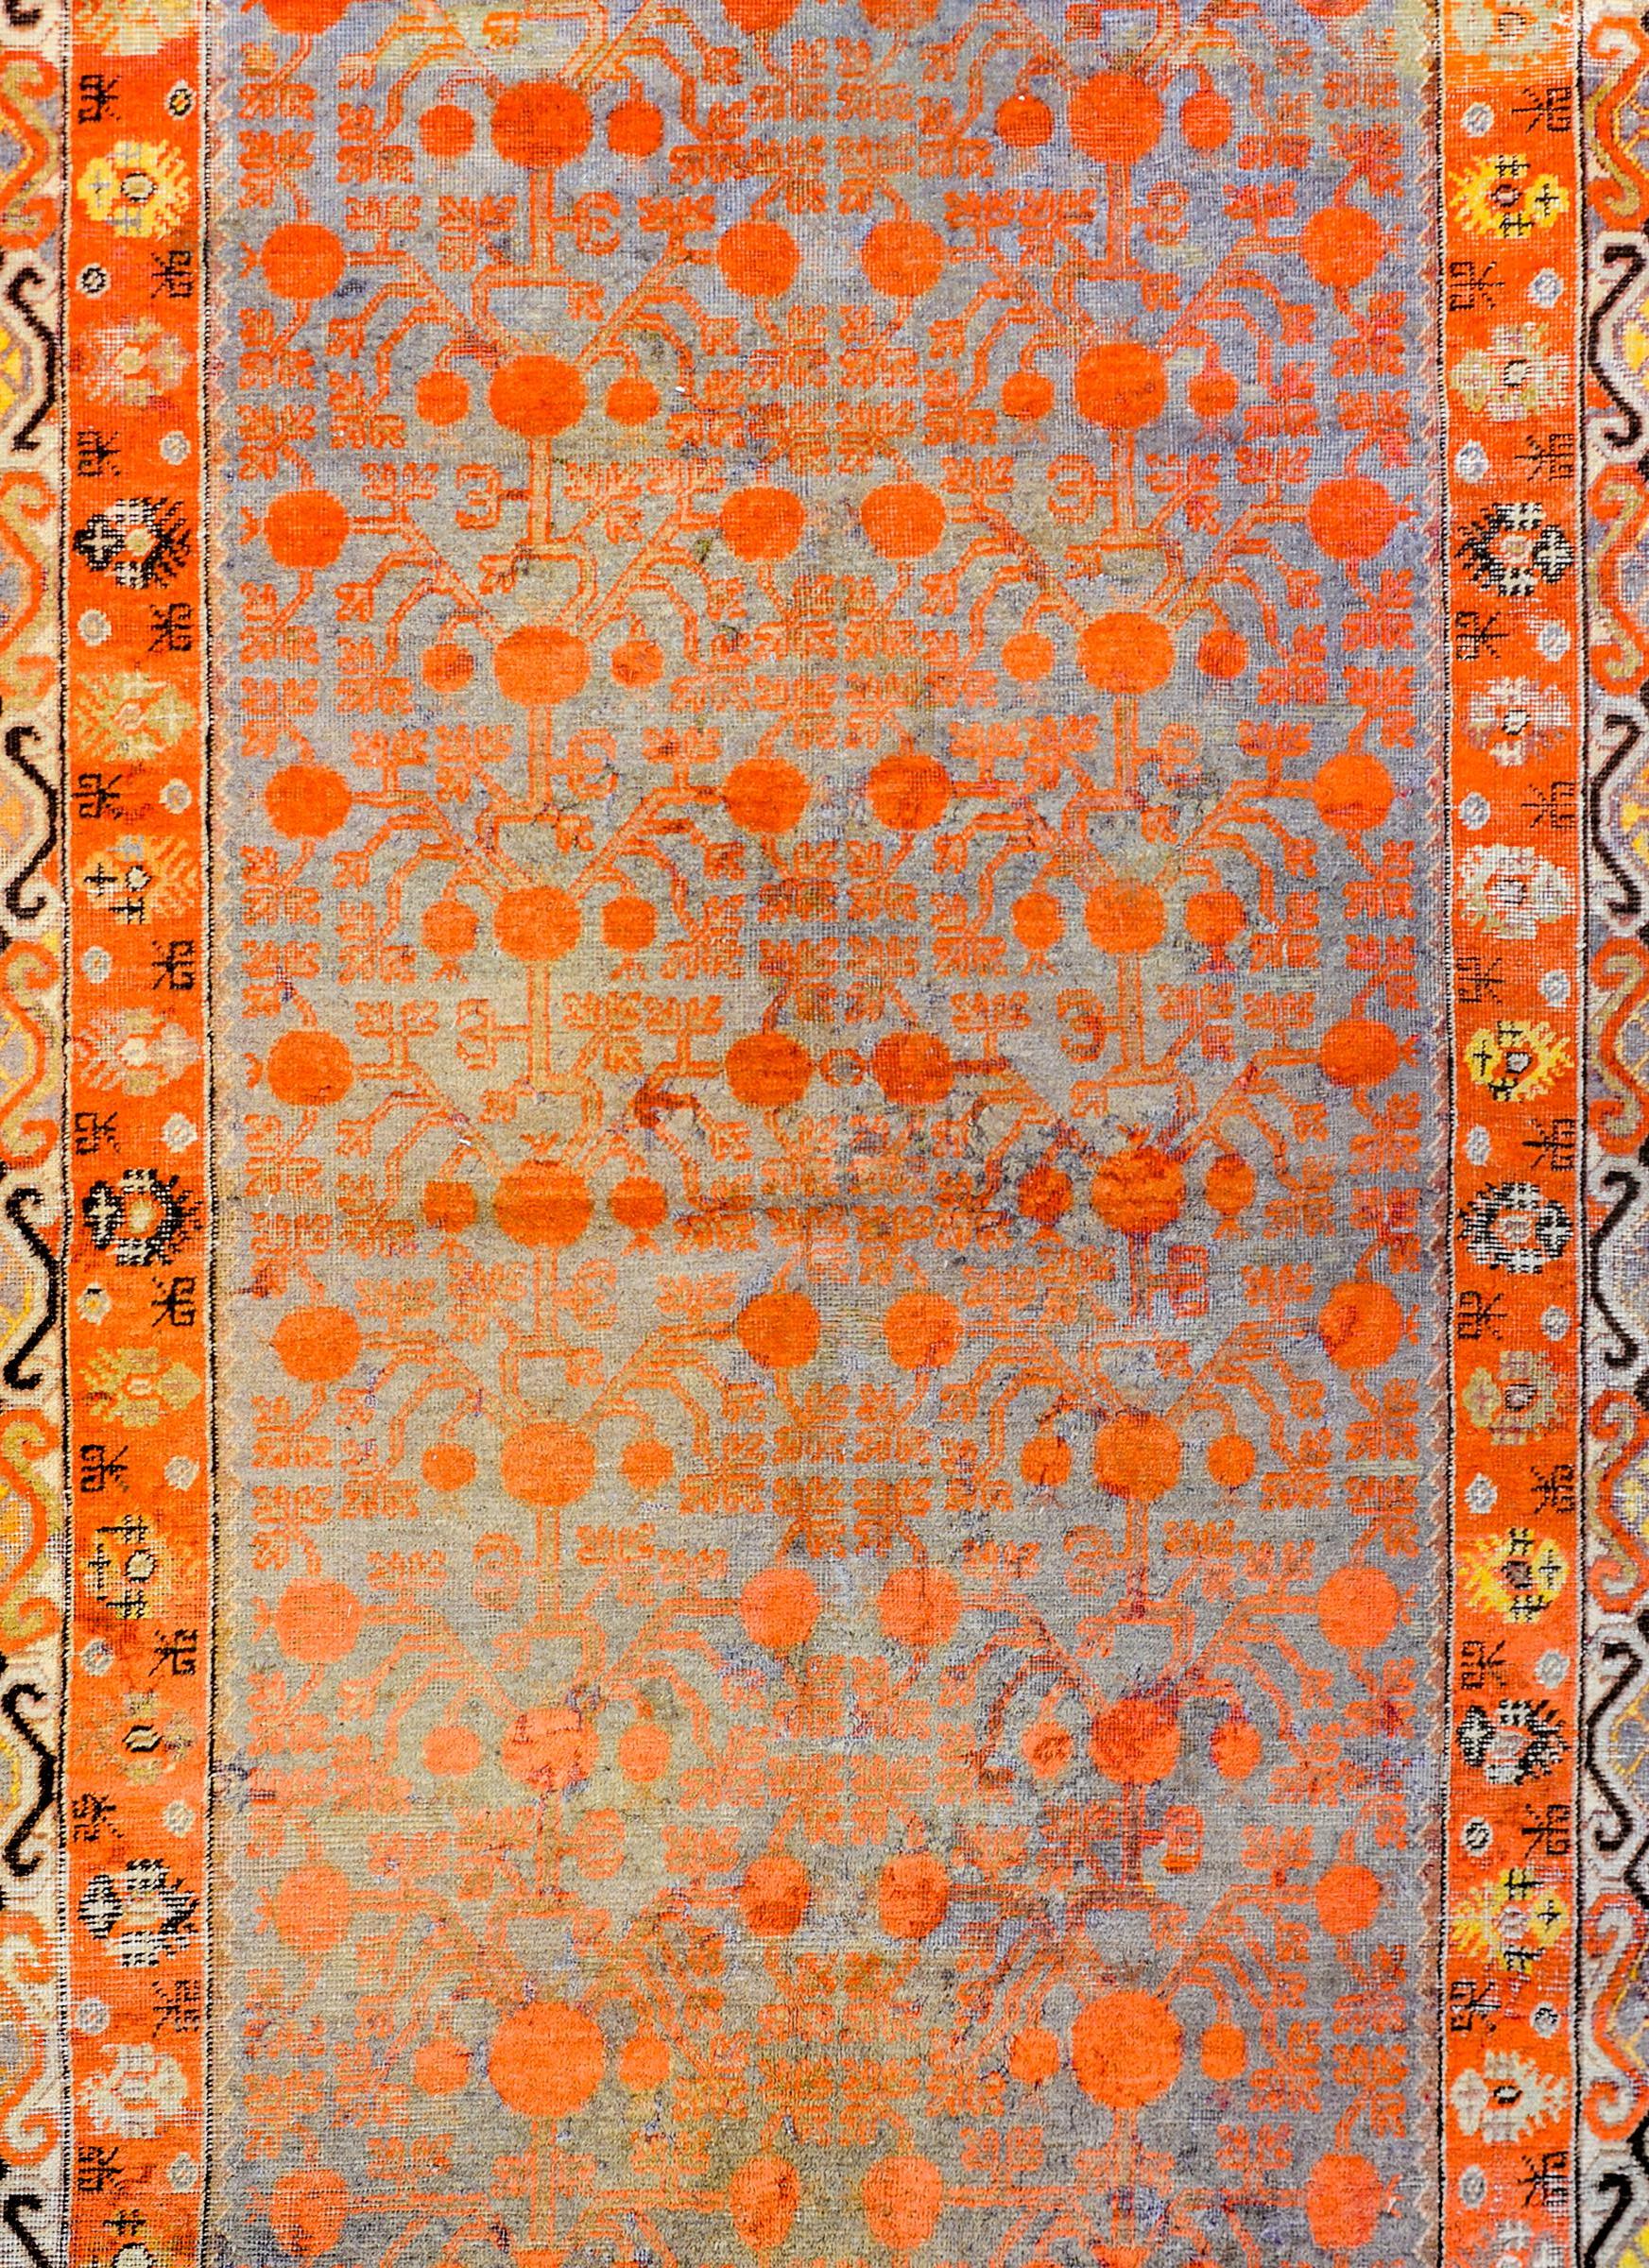 A beautiful early 20th century Central Asian Samarghand with a traditional all-over trellis pomegranate pattern woven in orange colored wool on a faded indigo ground. The border is wonderful with a stylized tree-of-life inner stripe and a wide outer